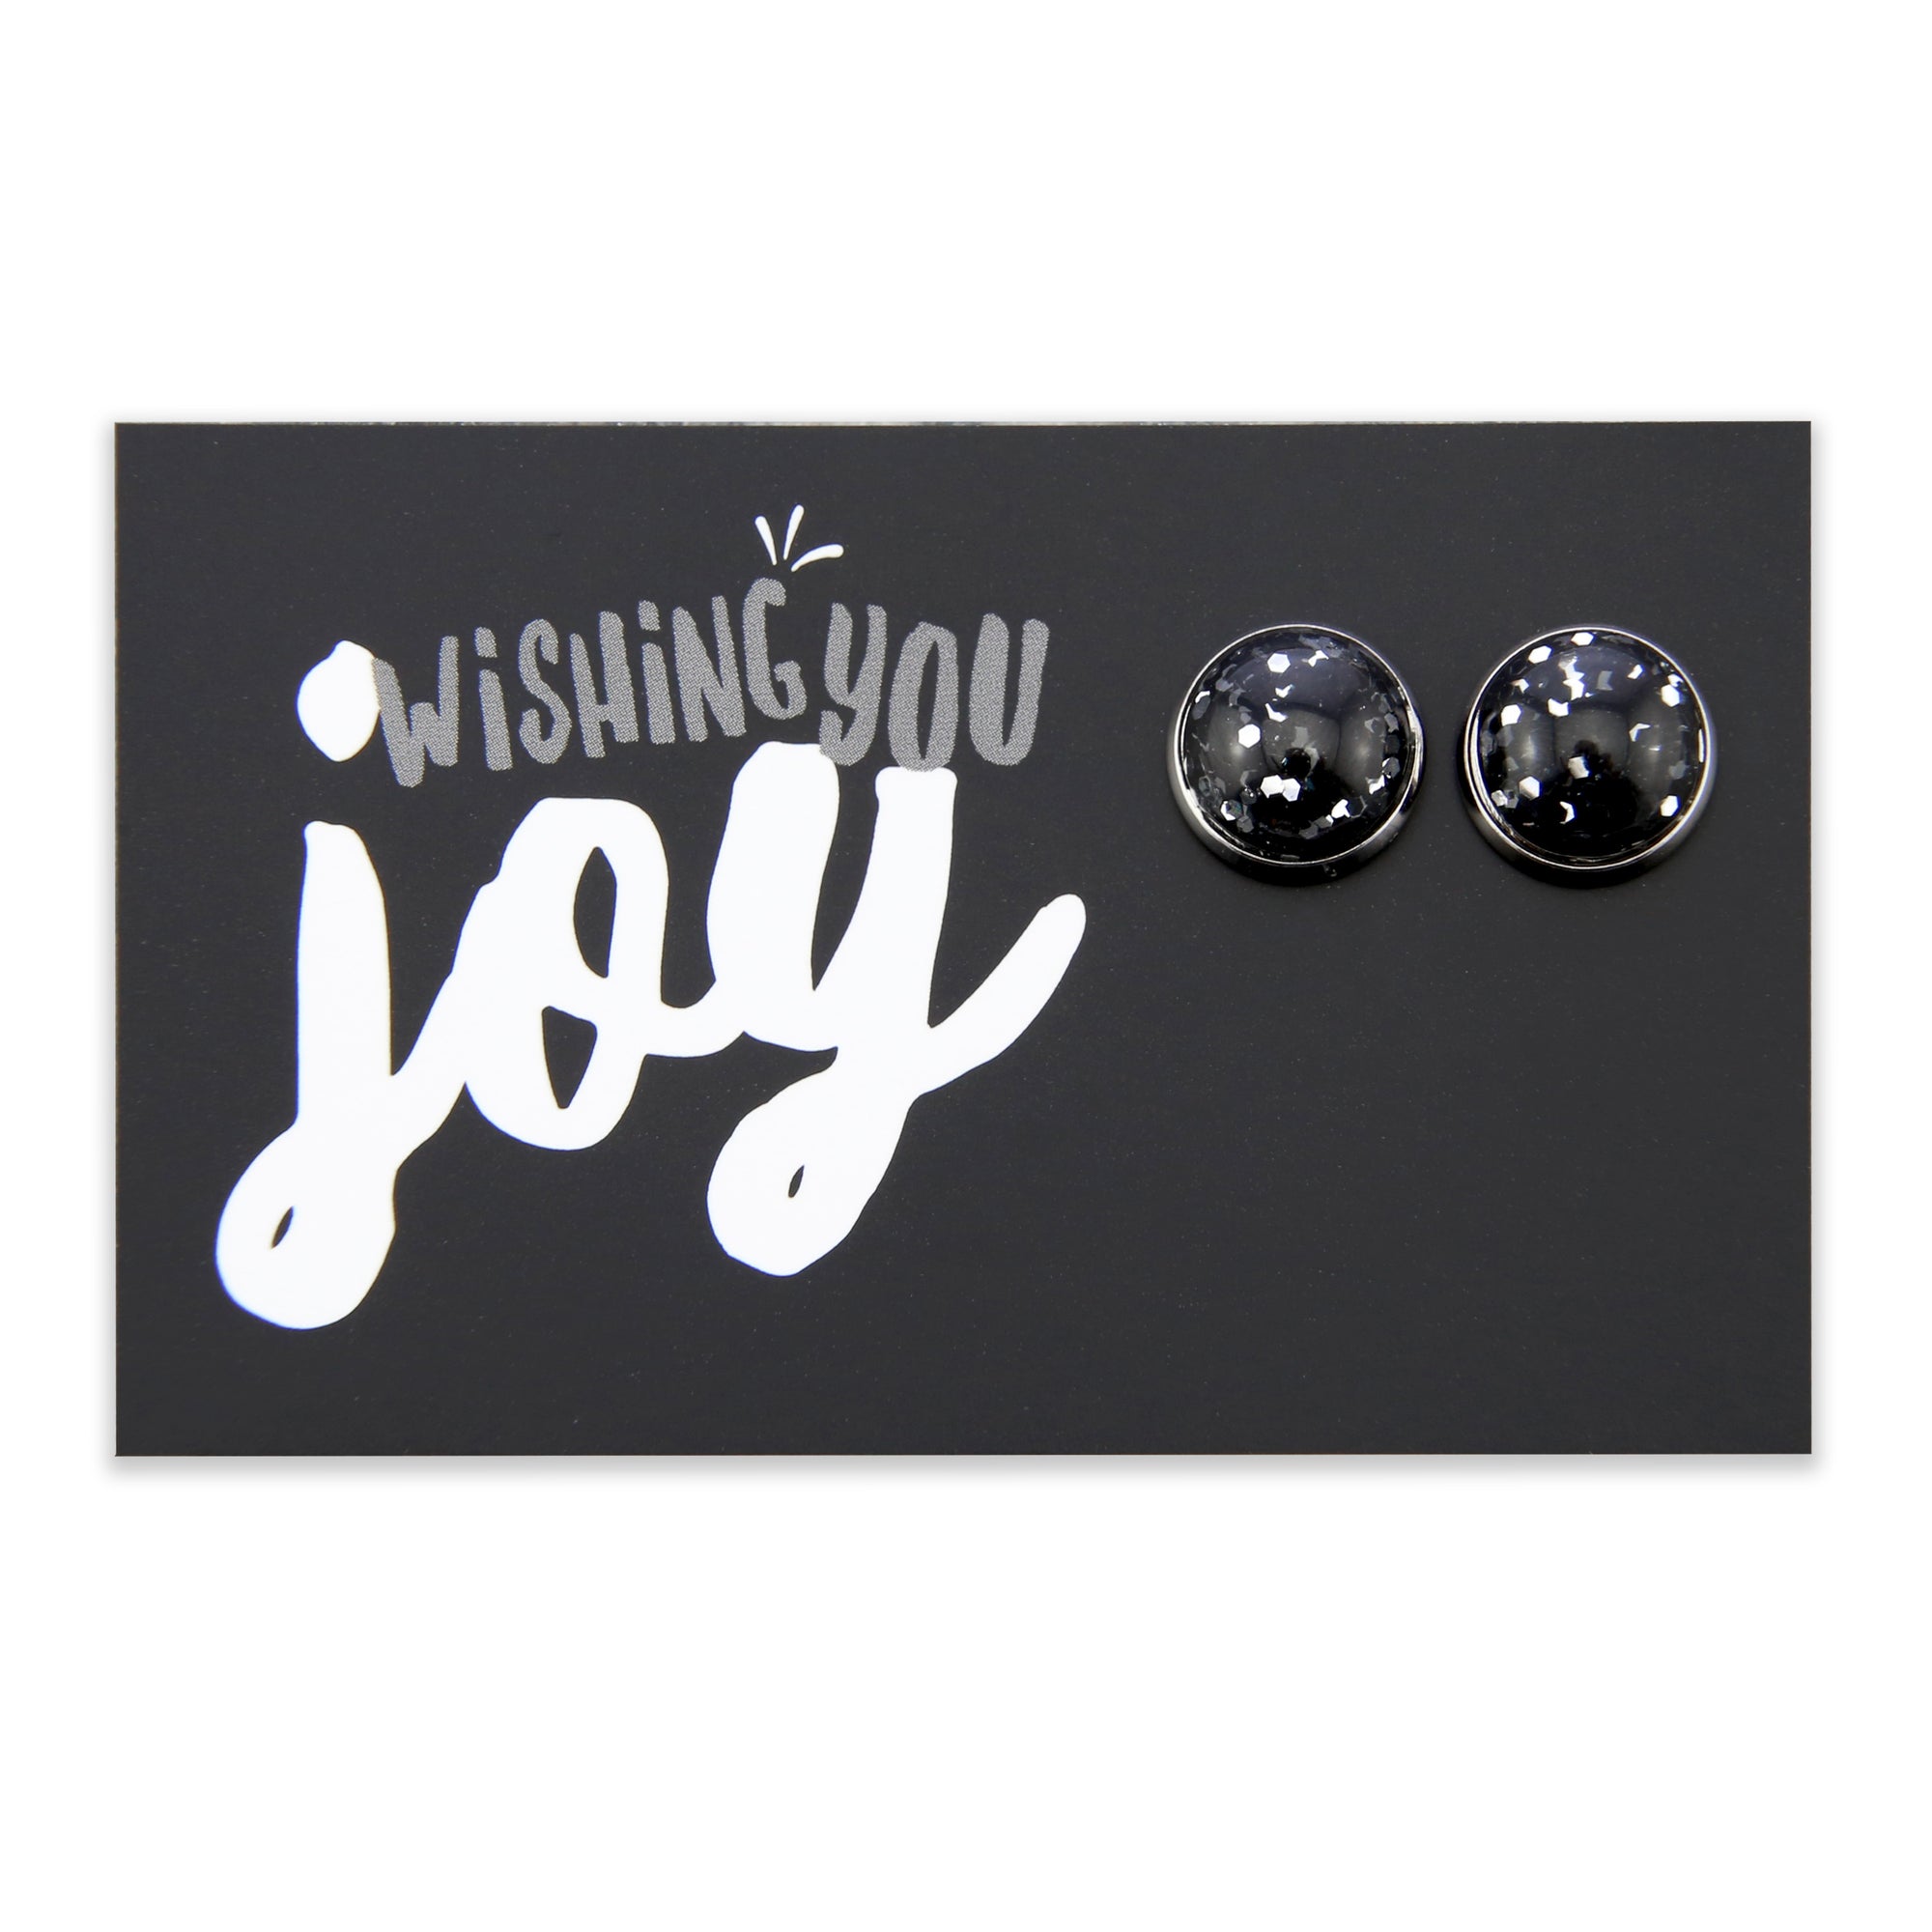 Black and silver glitter stud earrings with silver surround on wishing you joy card.